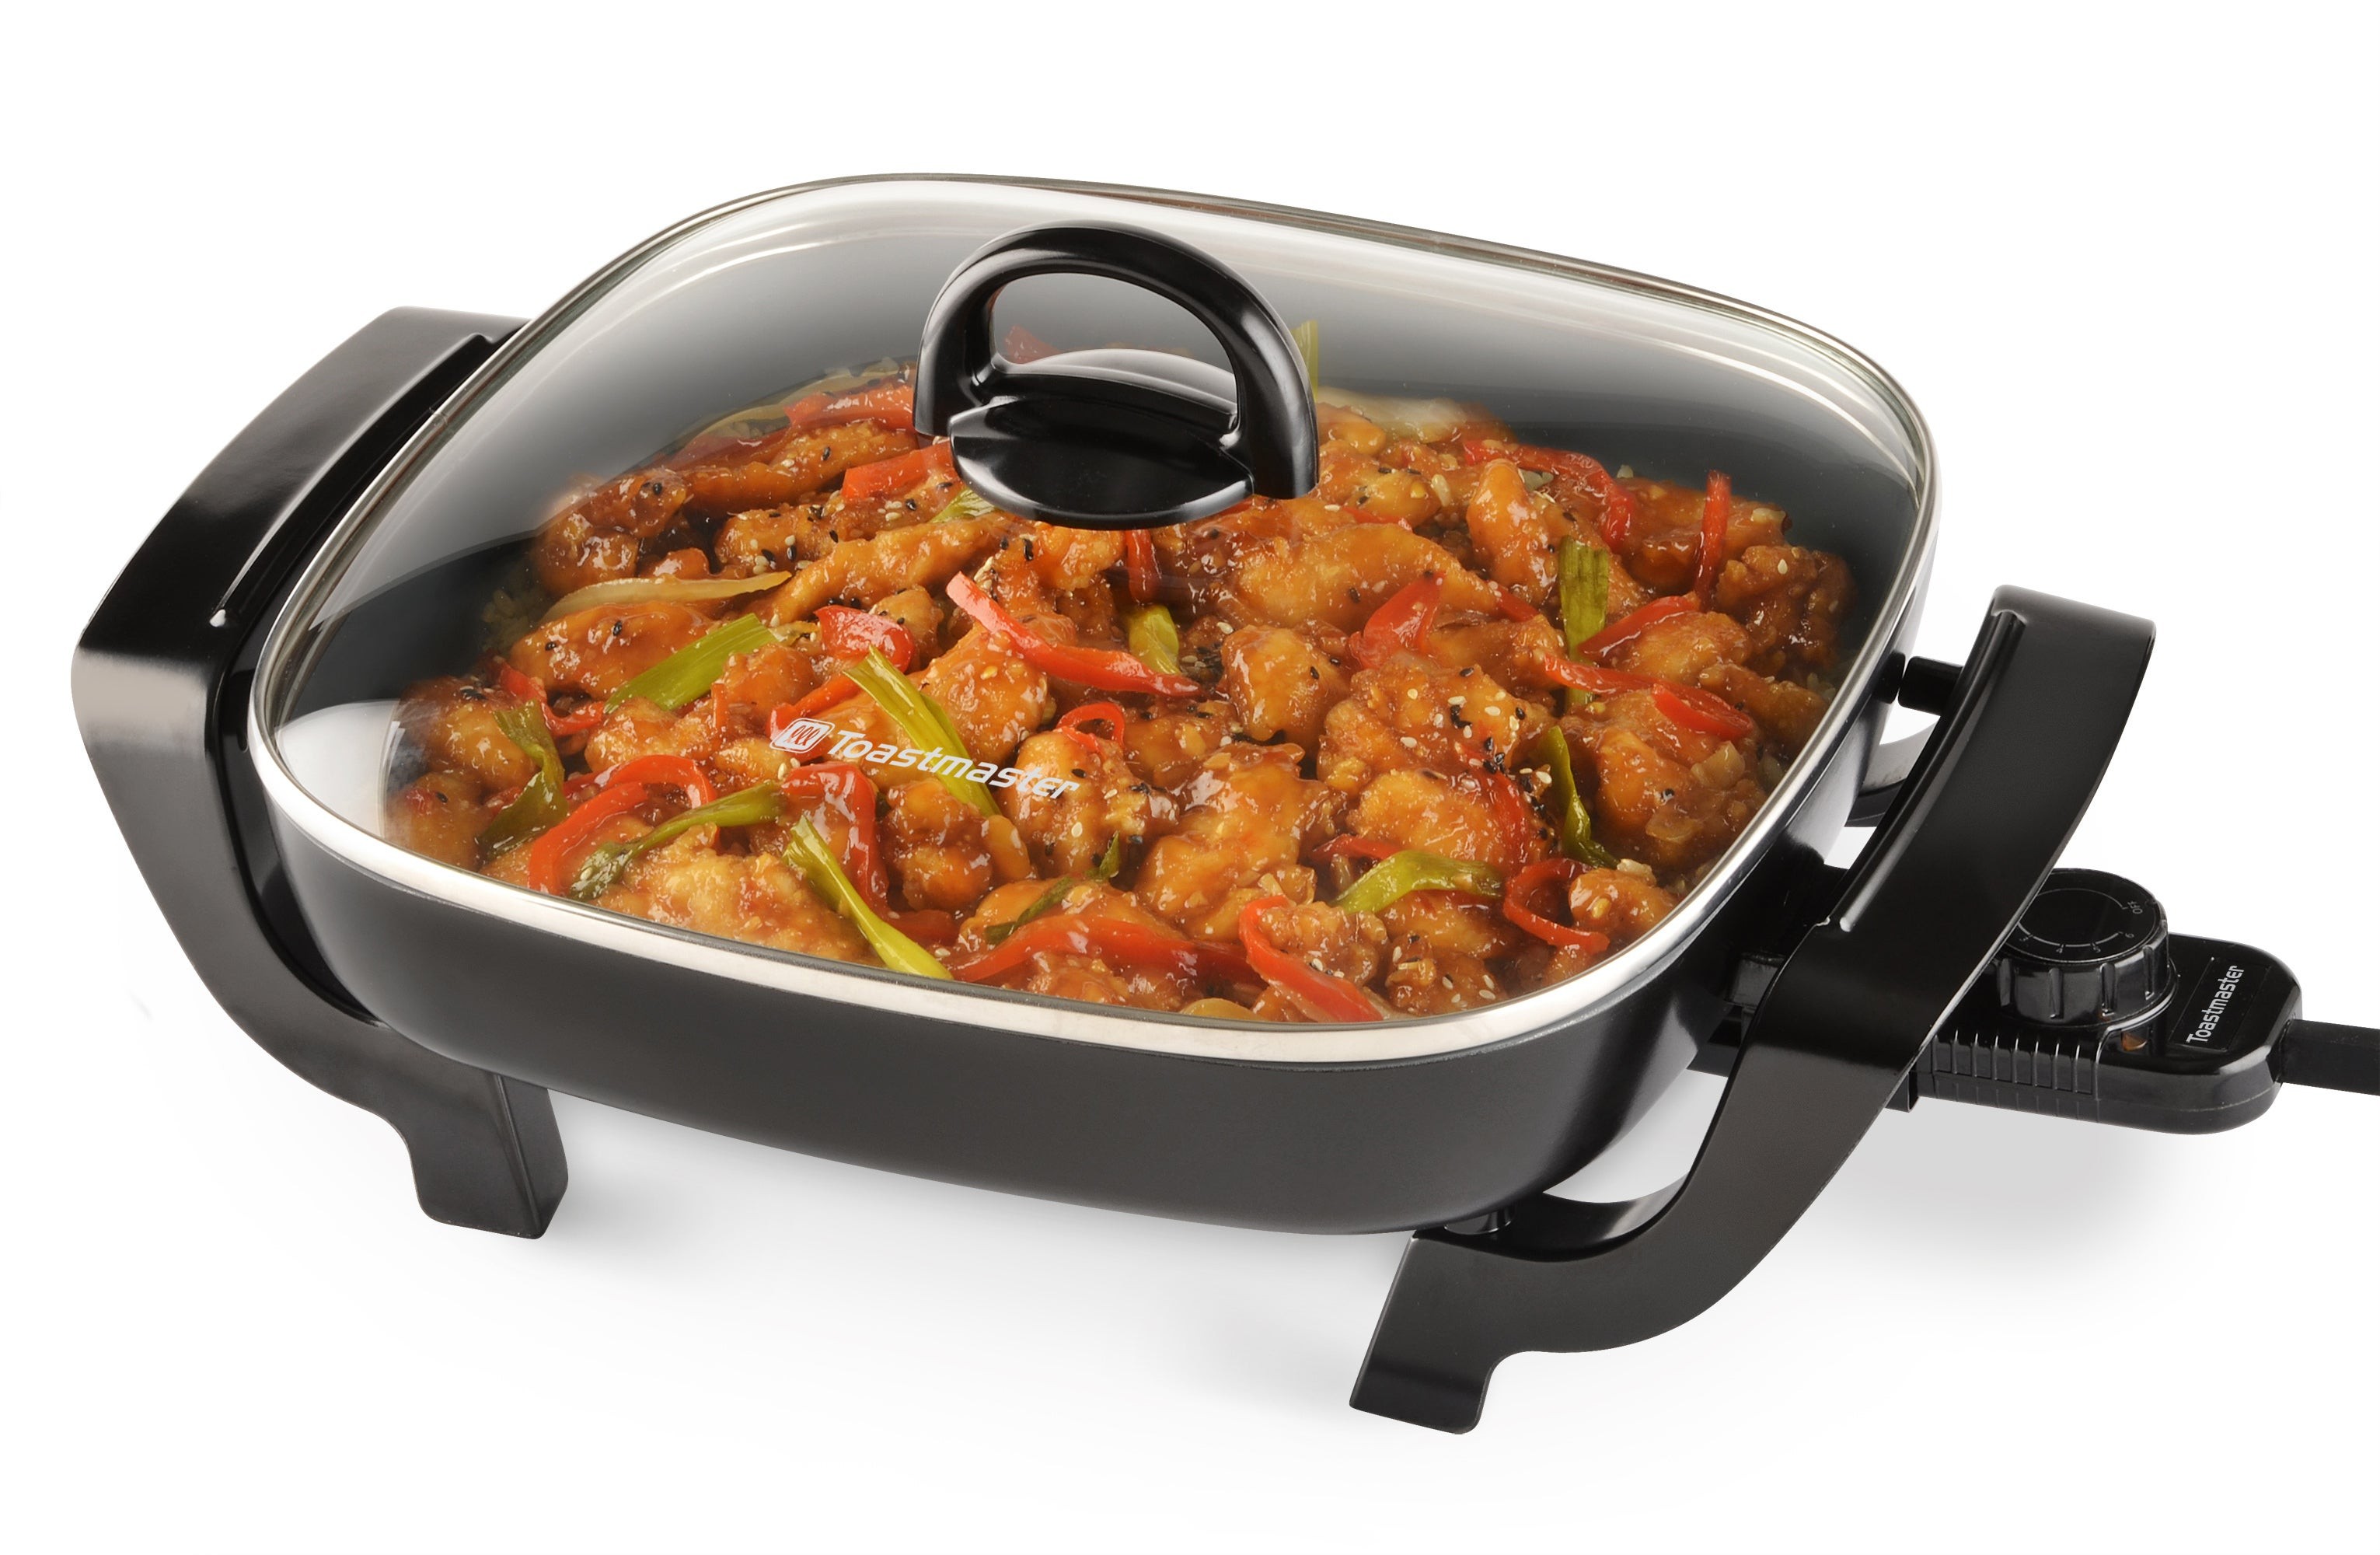 12" Nonstick Electric Skillet w/ Removable Power